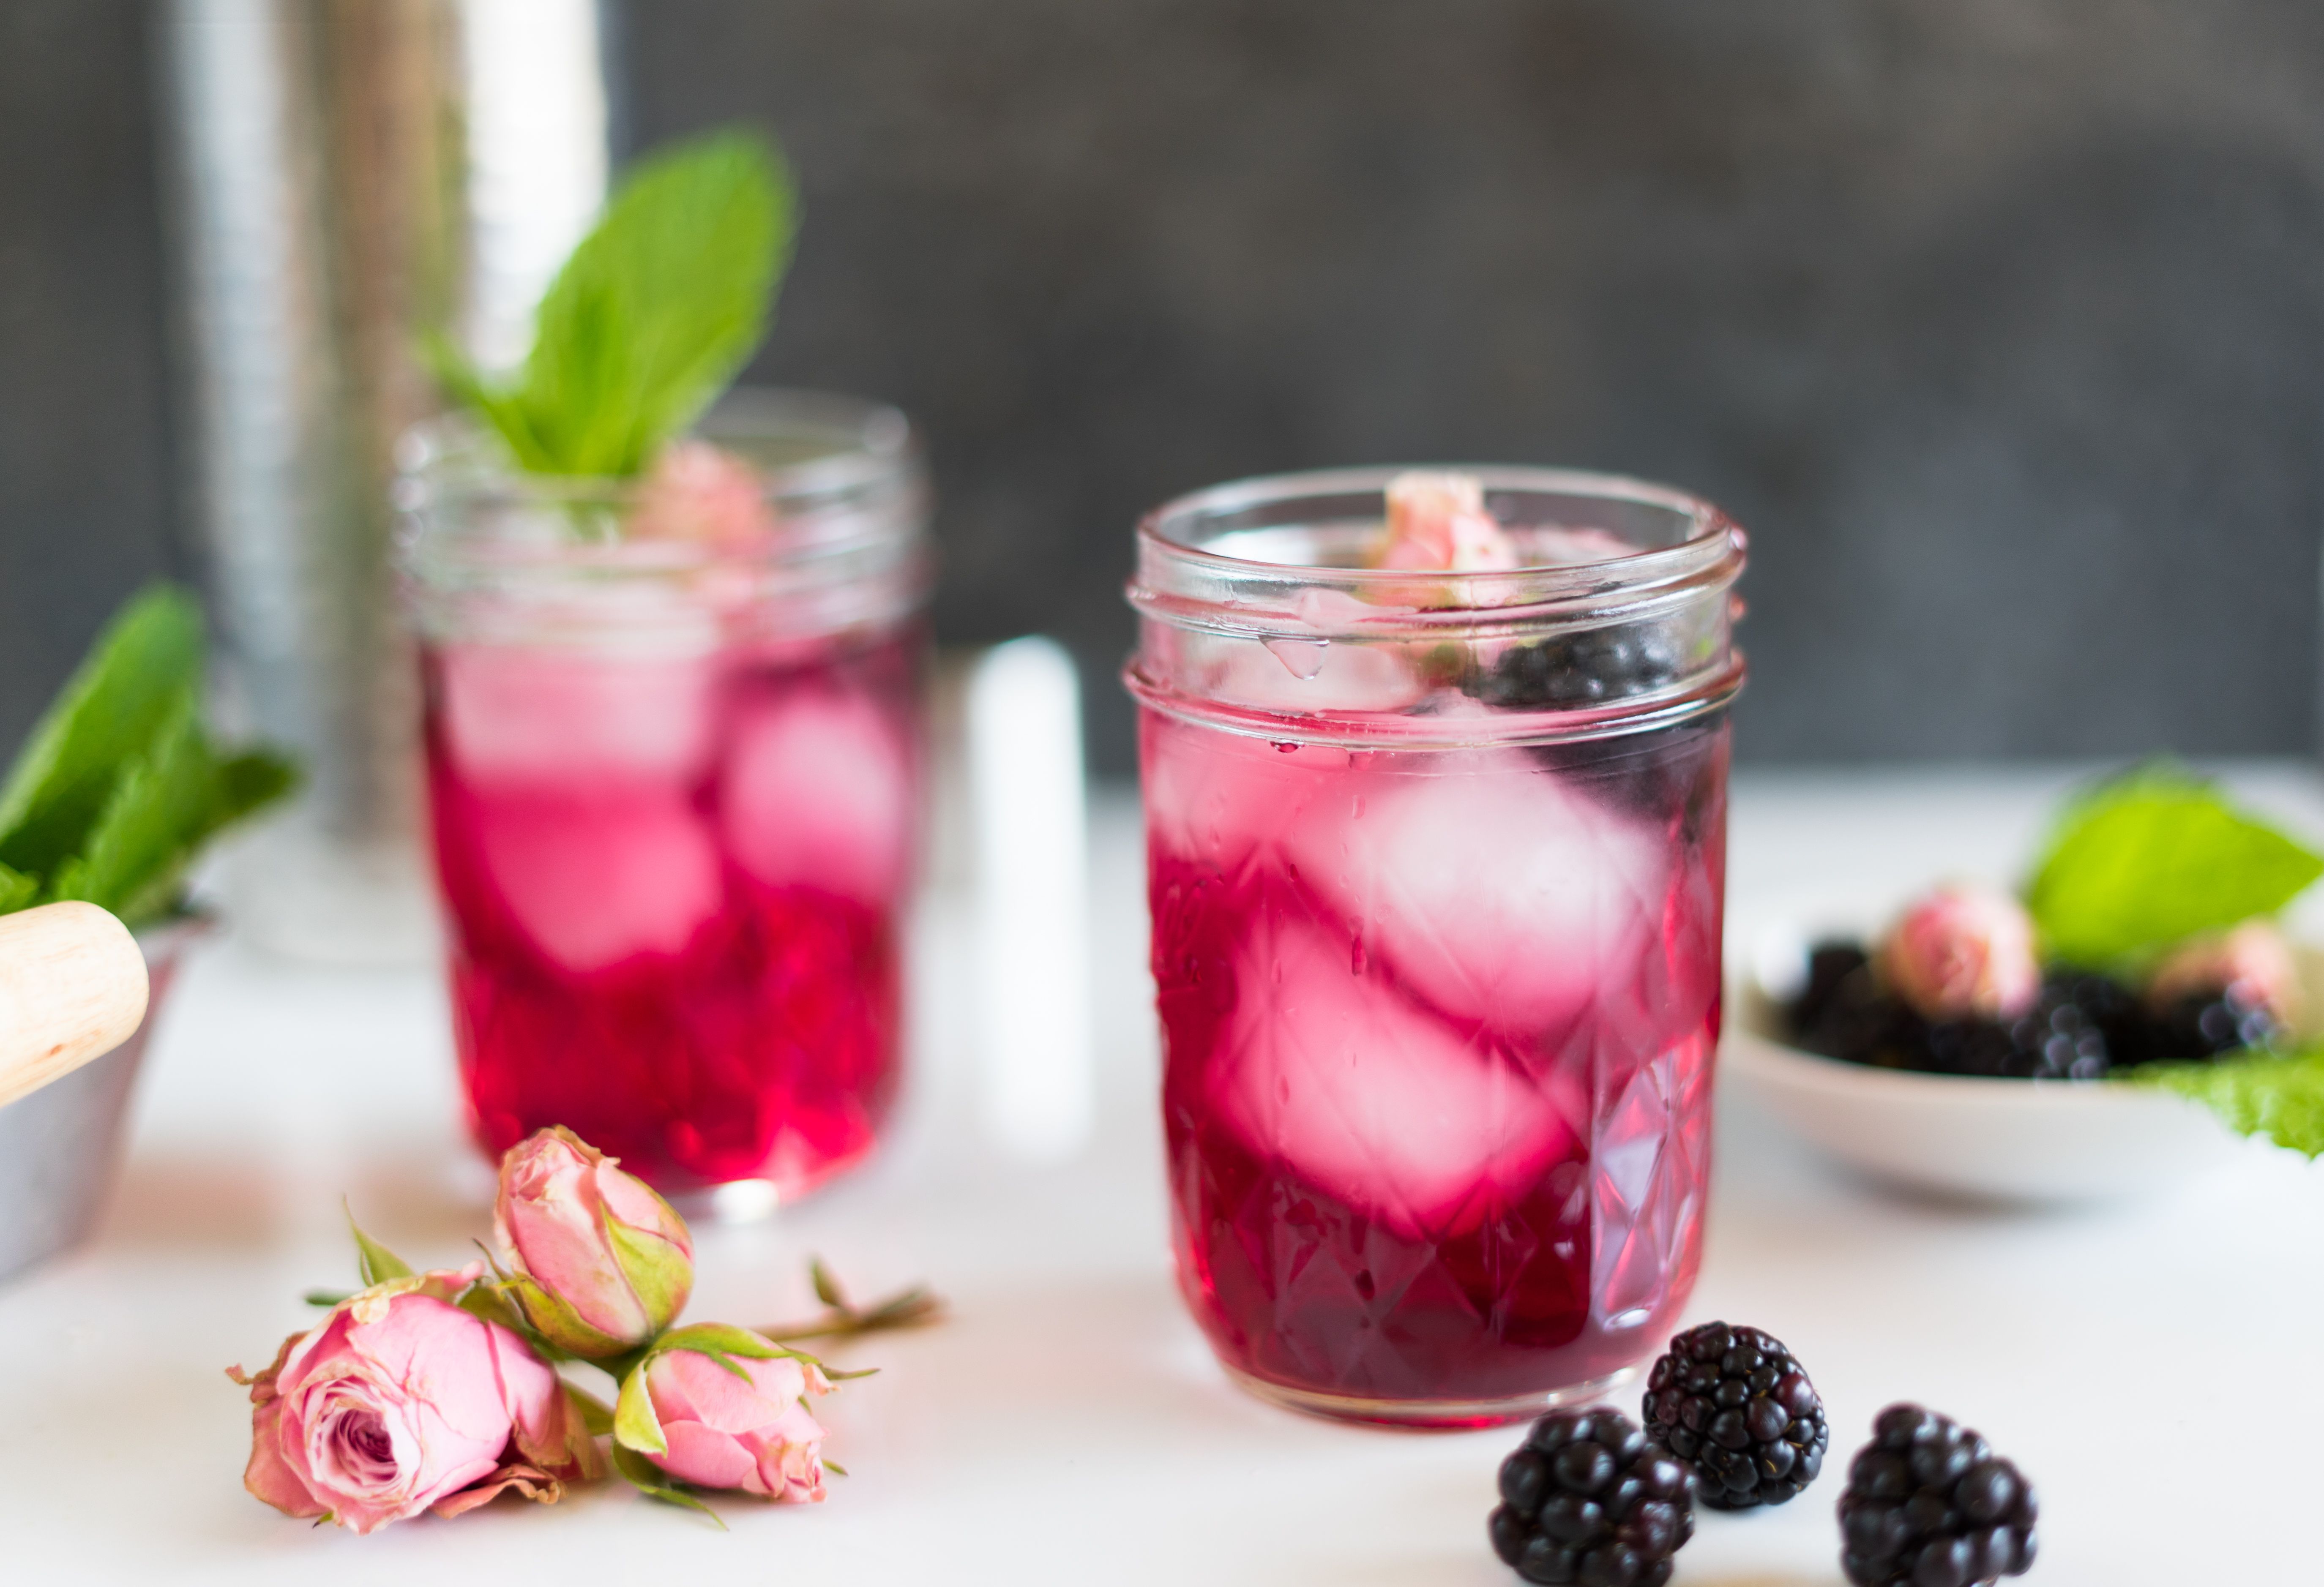 4 Recipes For A Purple Haze Mixed Drink,Pizza Toppings Images